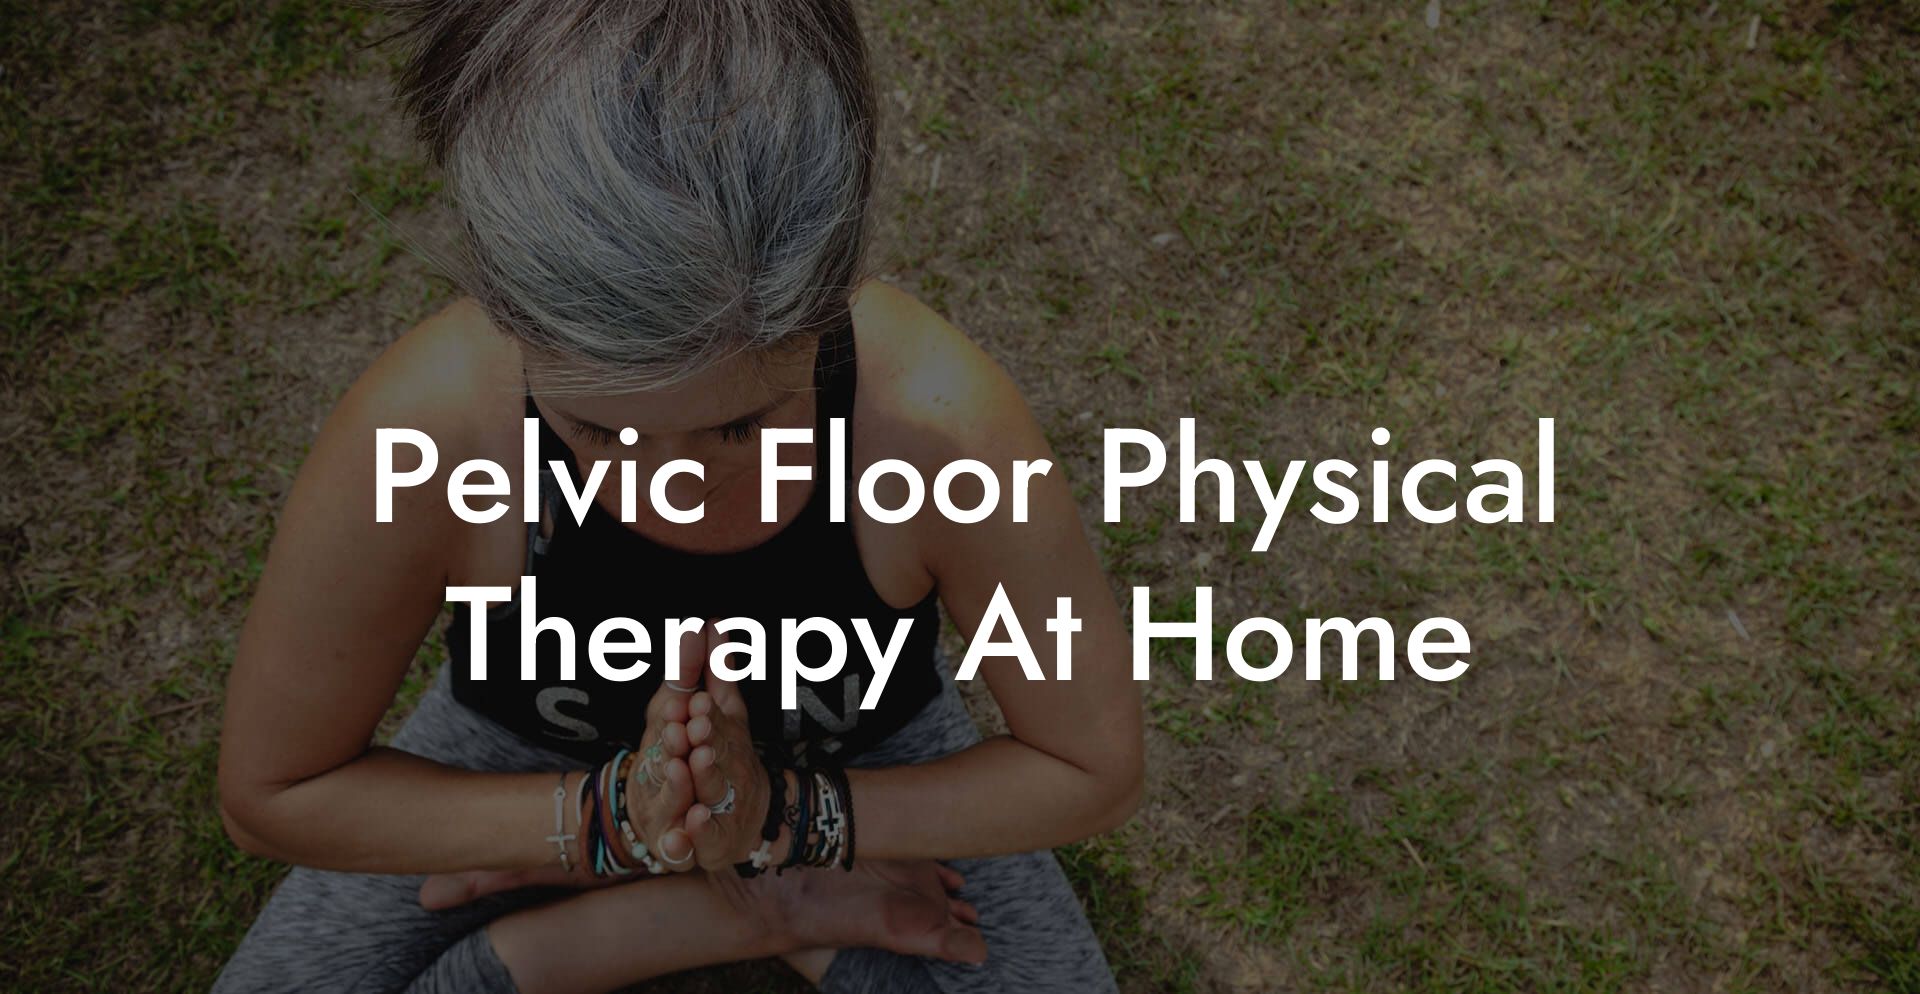 Pelvic Floor Physical Therapy At Home